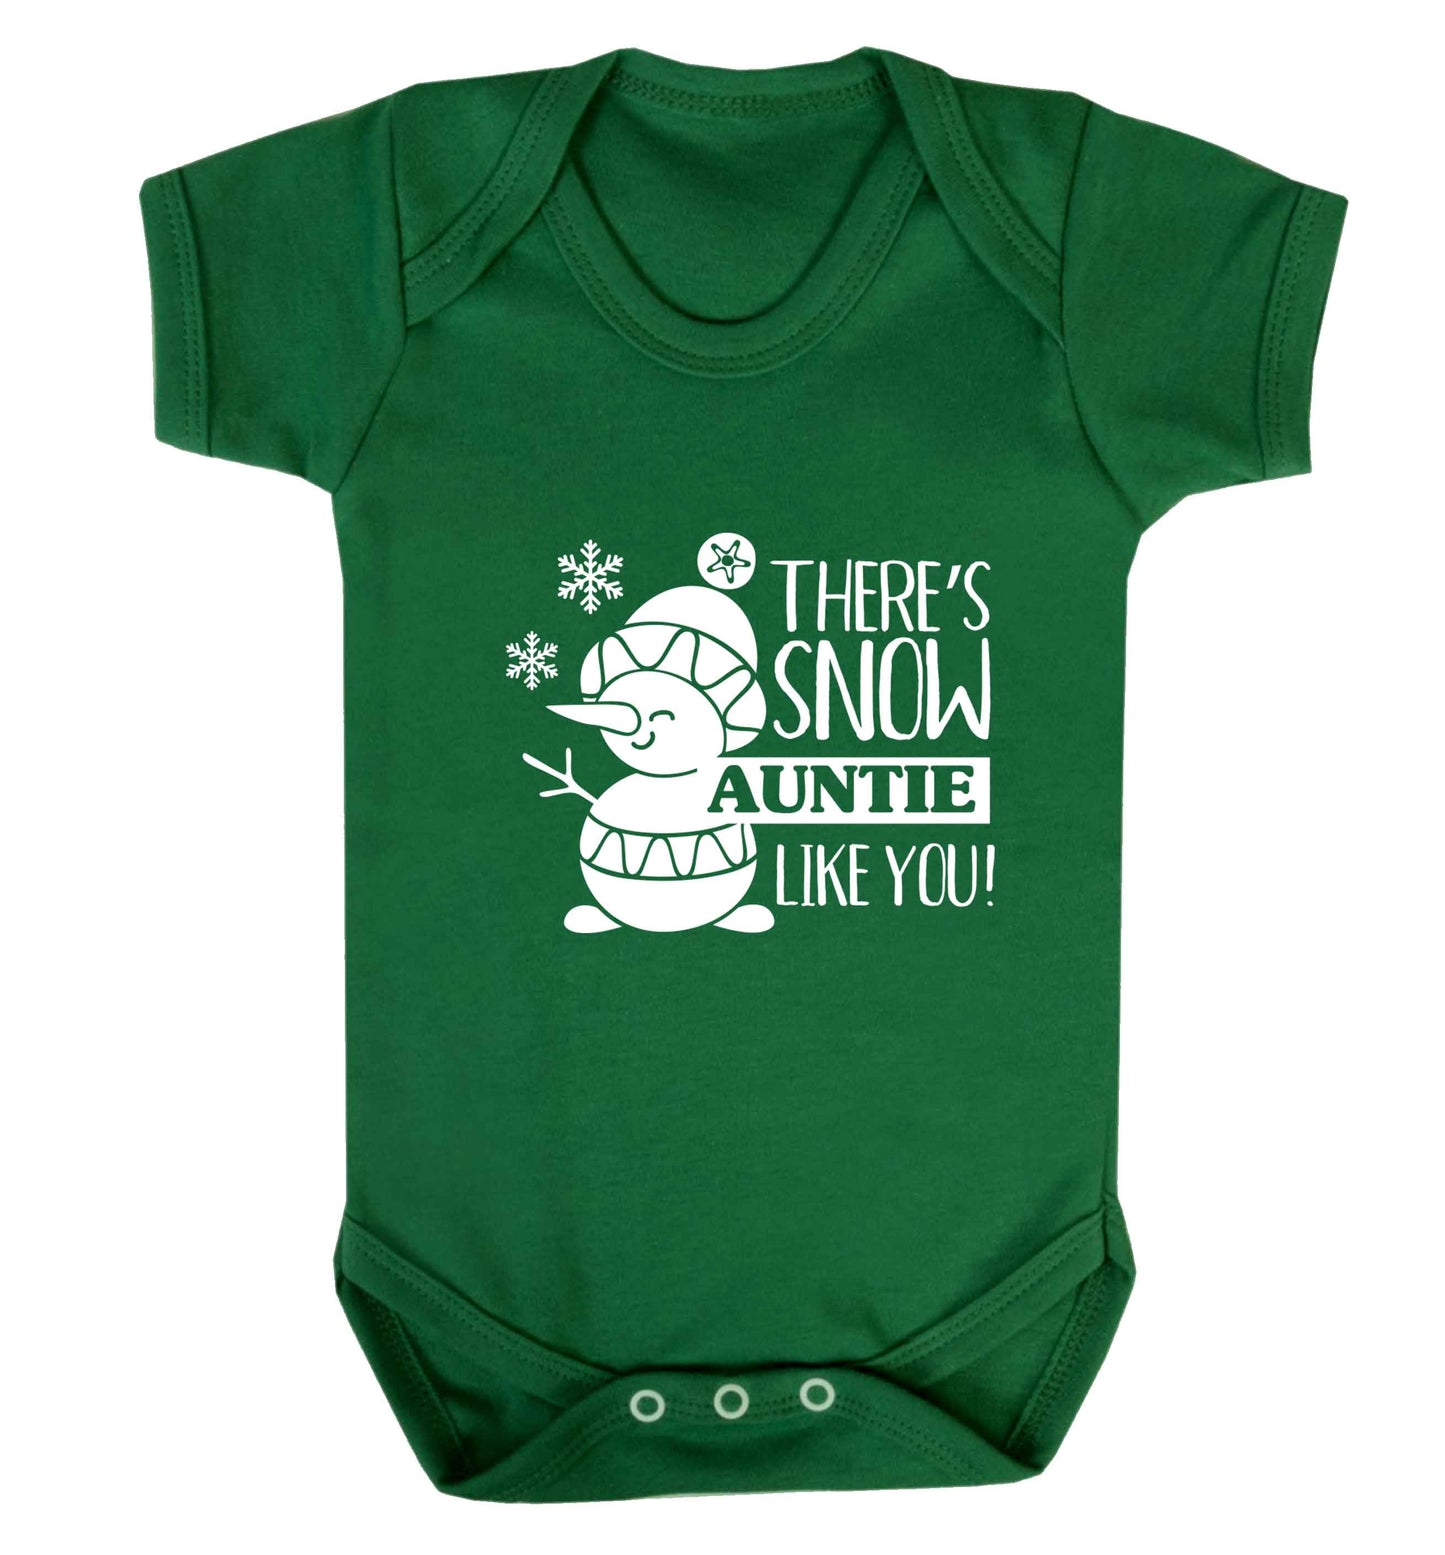 There's snow auntie like you baby vest green 18-24 months